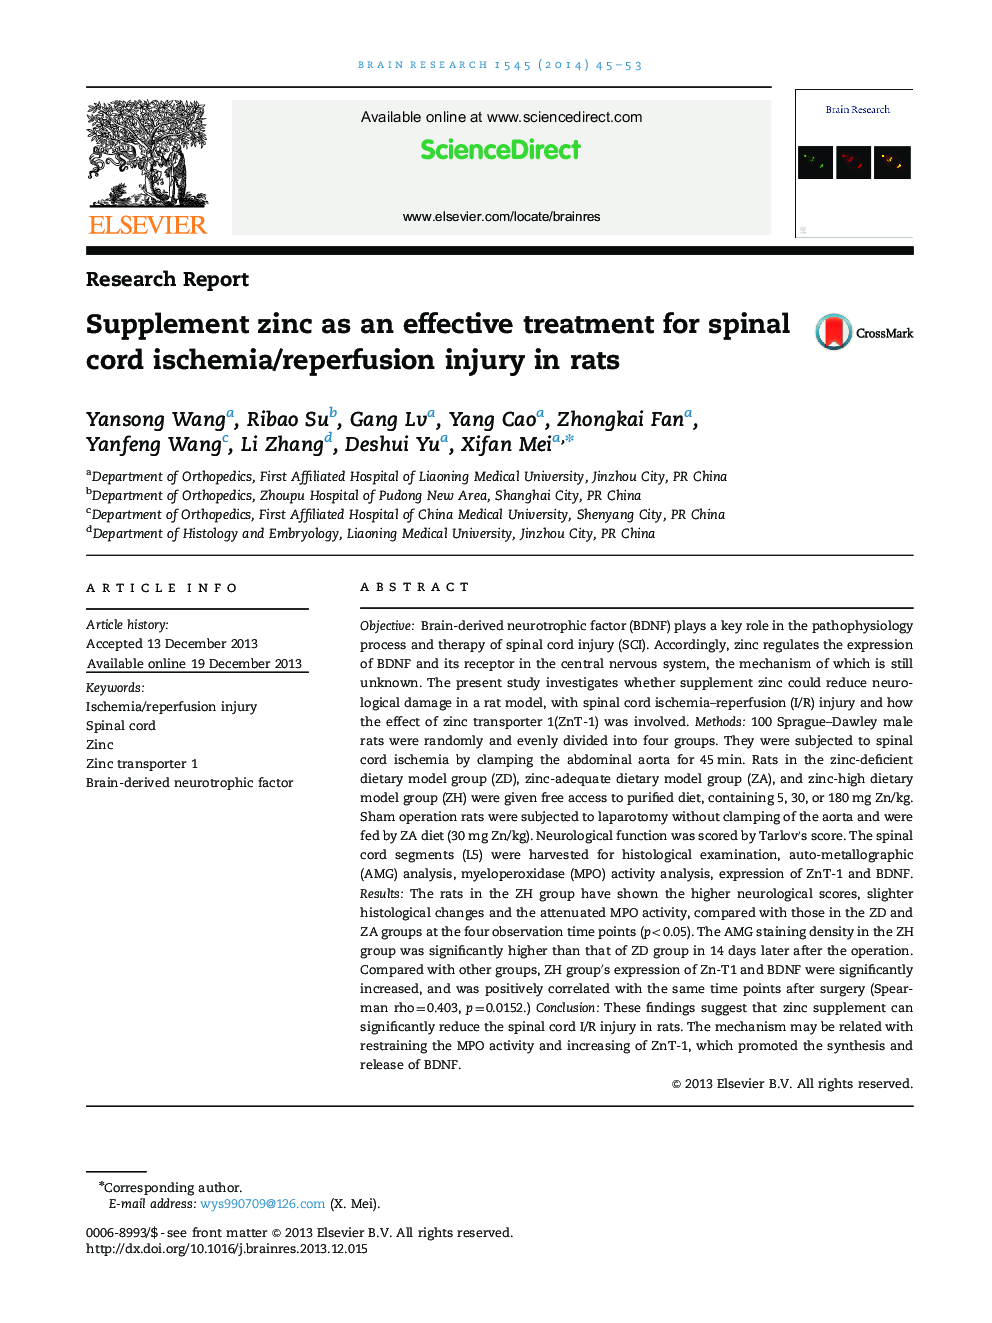 Supplement zinc as an effective treatment for spinal cord ischemia/reperfusion injury in rats